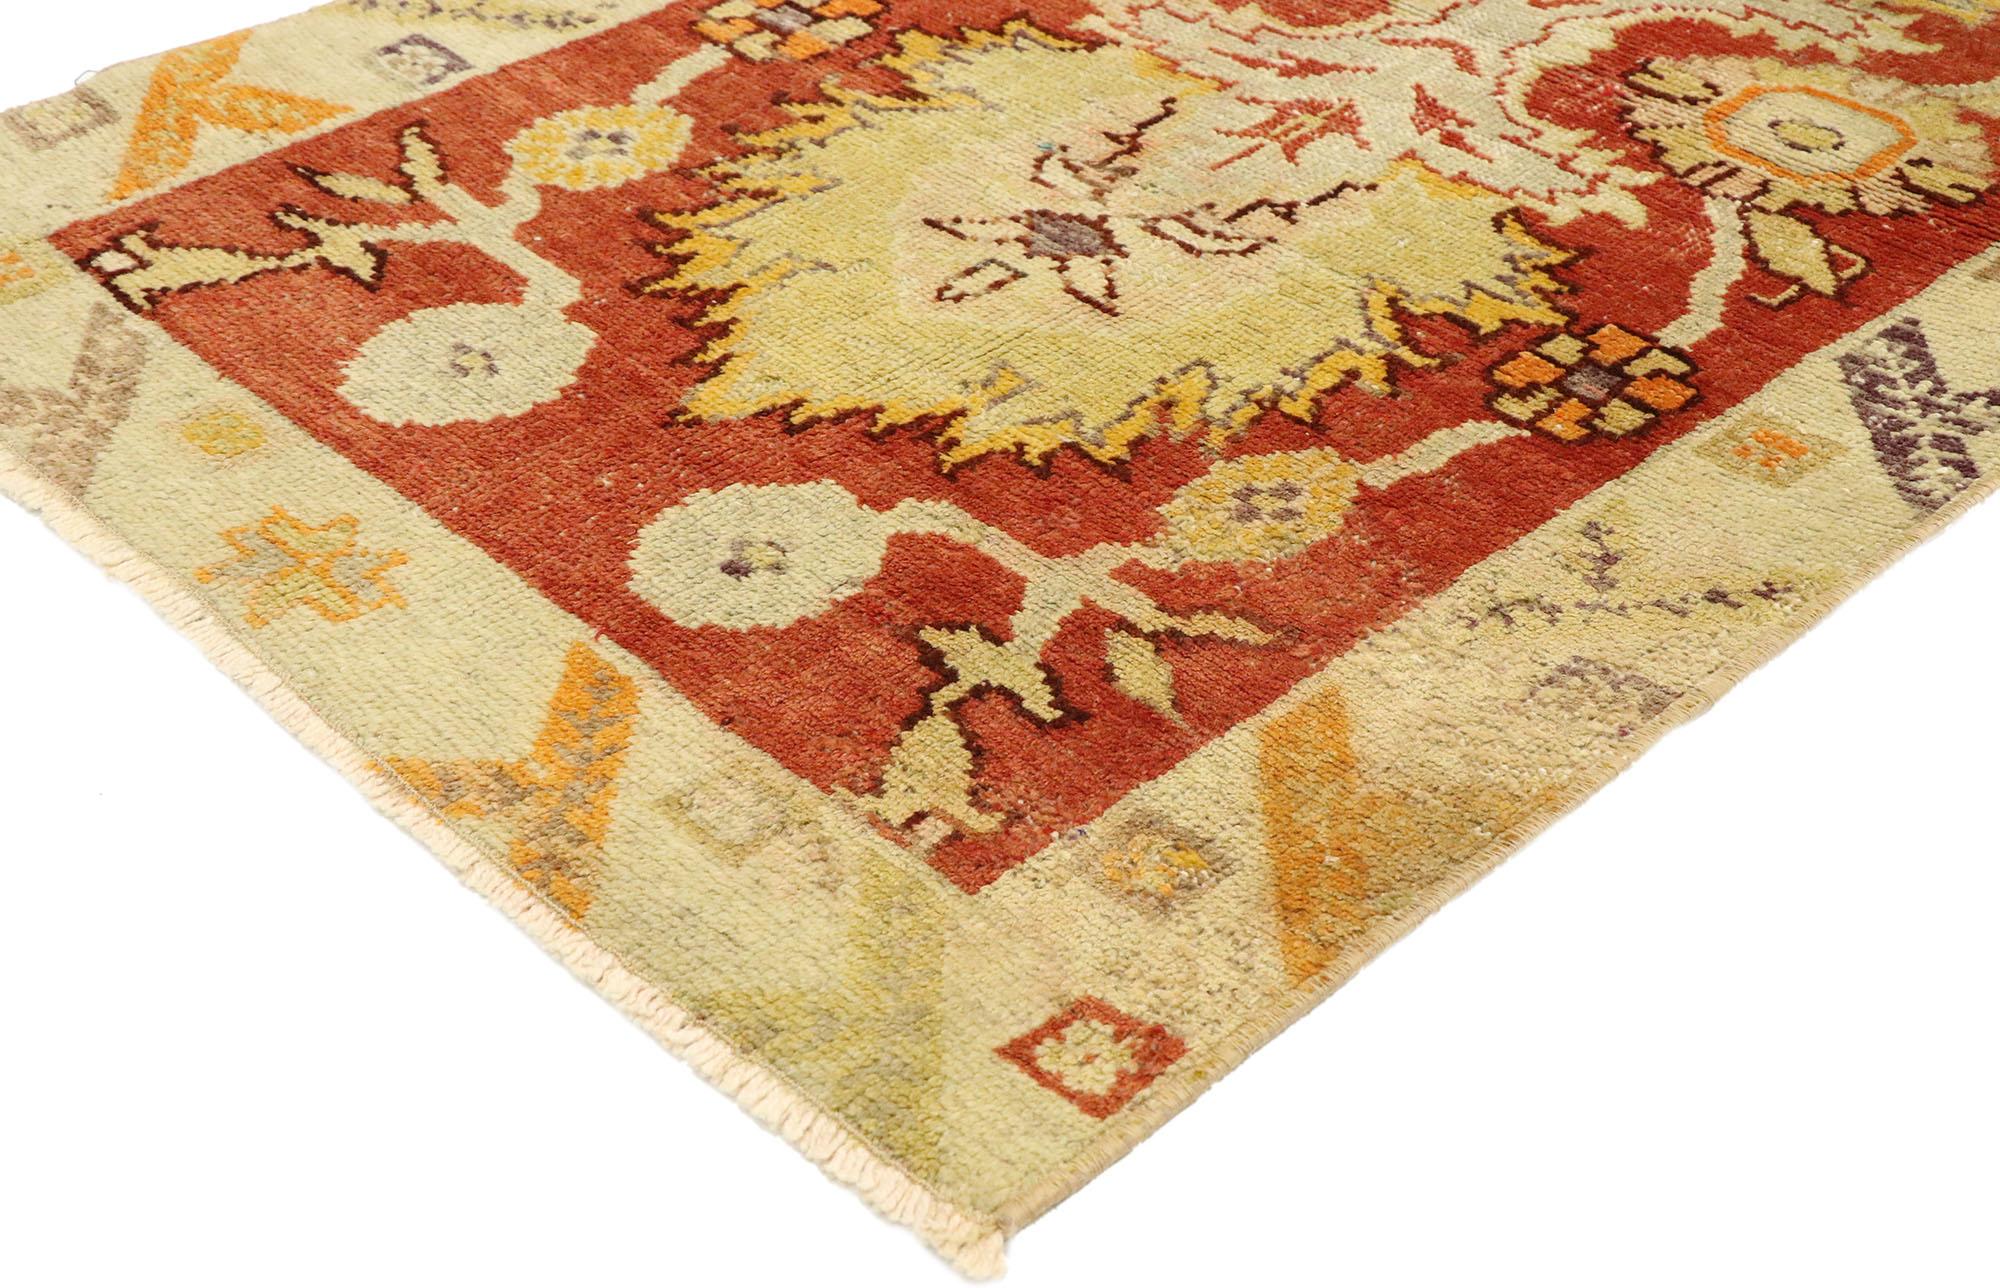 52101, distressed vintage Turkish Oushak rug with Modern Rustic Northwestern style. Warm and inviting combined with a lovingly time-worn field, this hand knotted wool distressed vintage Turkish Oushak rug is poised to impress. The weathered and